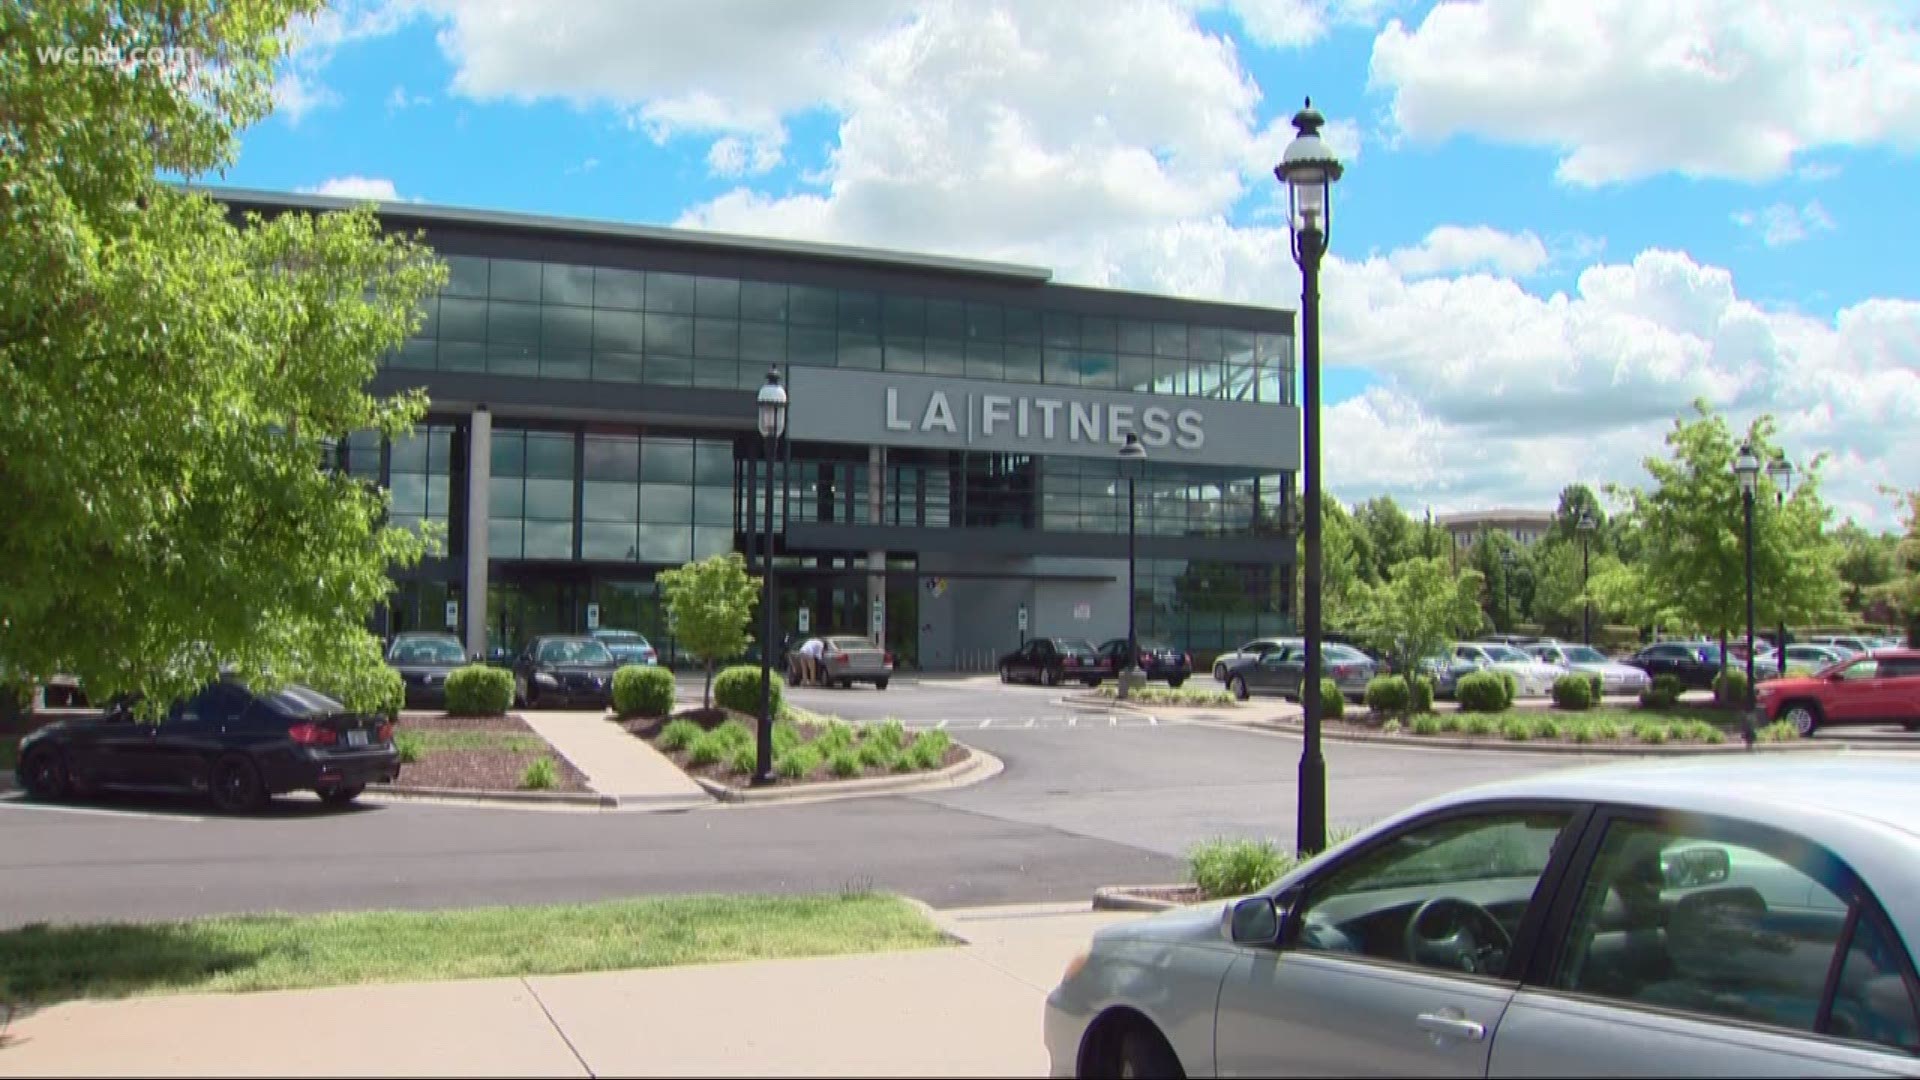 Man says he was racially profiled at gym